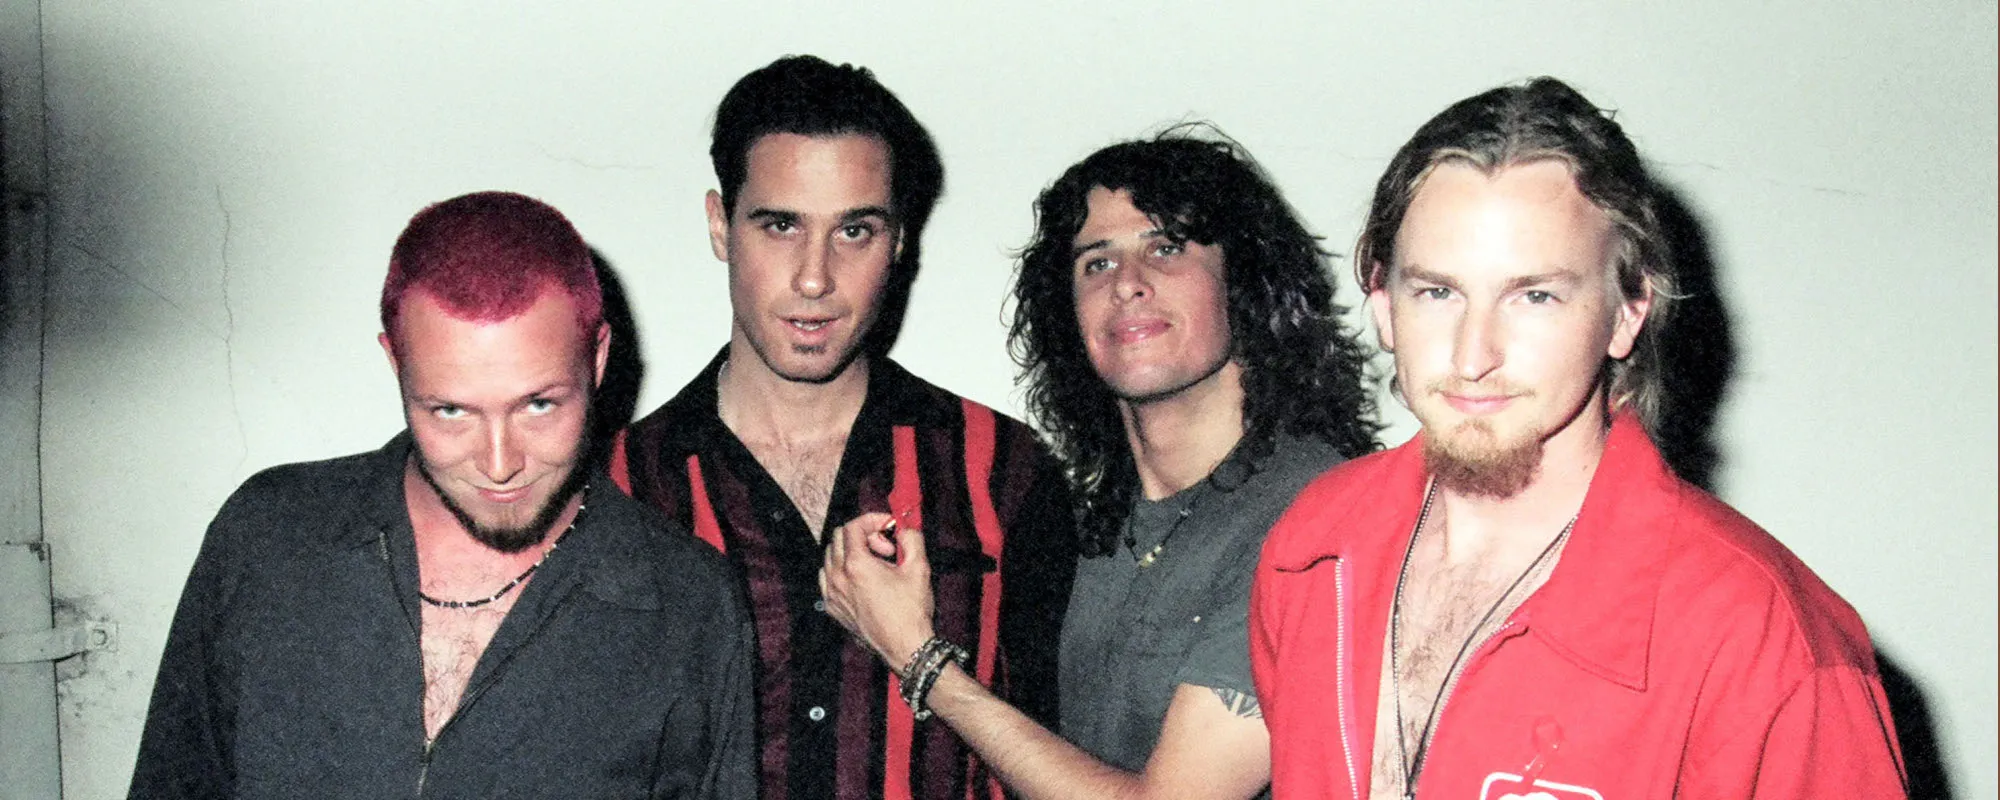 The Top 10 Stone Temple Pilots Songs